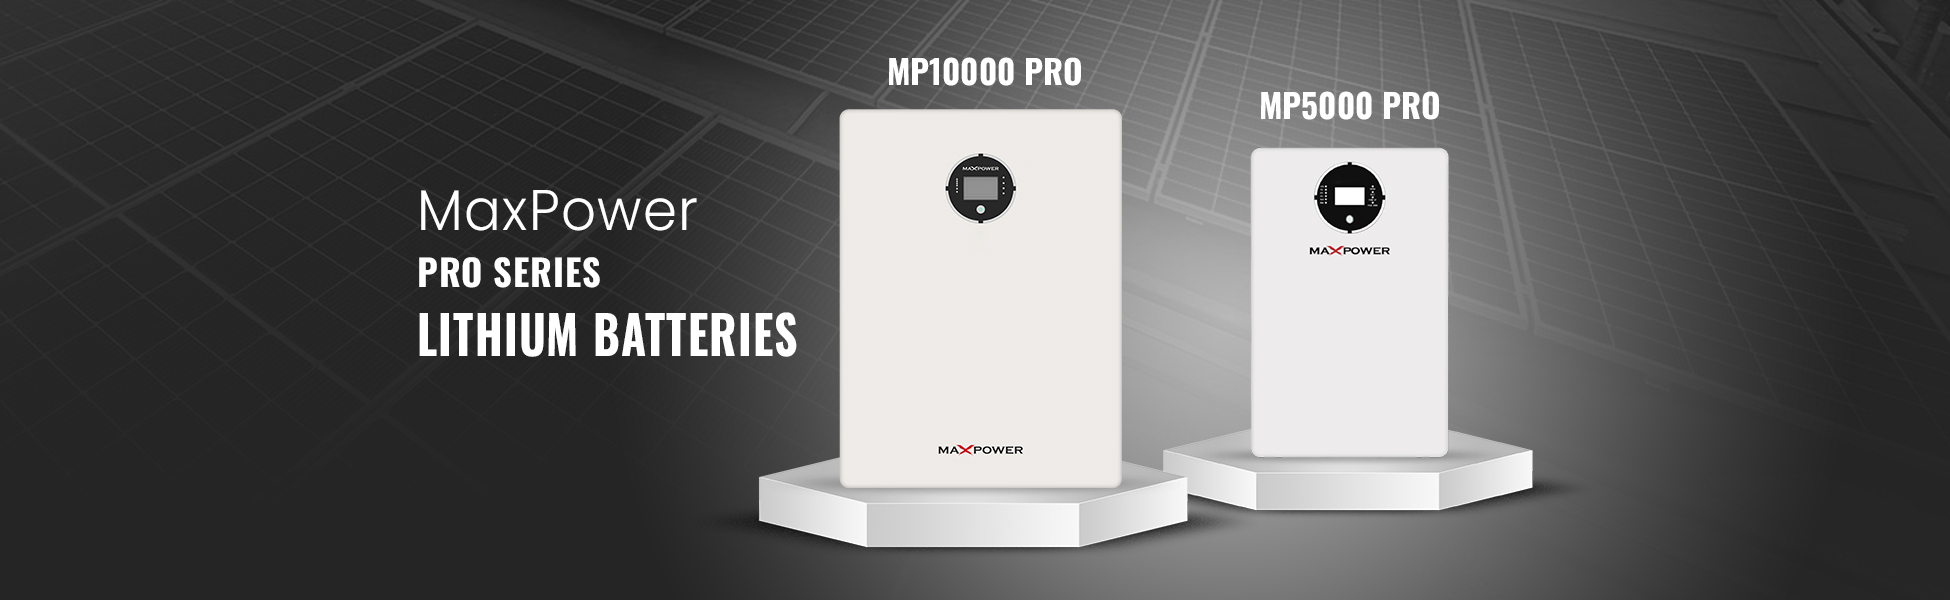 MP5000 Pro and MP10000 Pro Lithium Batteries